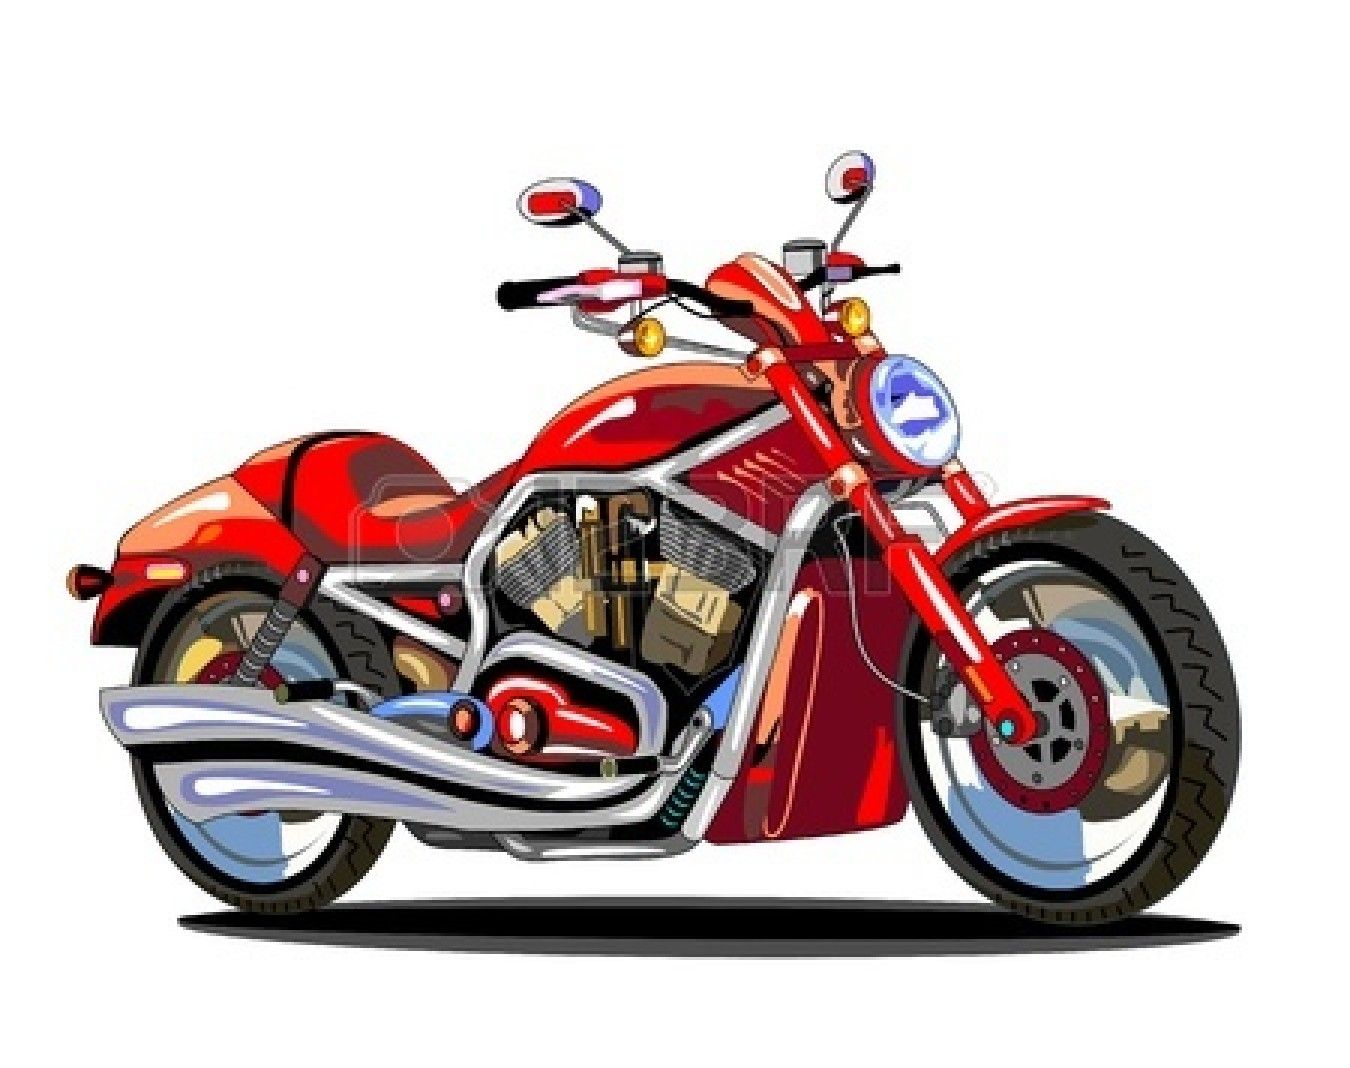 Free Image Motorcycles, Download Free Clip Art, Free Clip Art